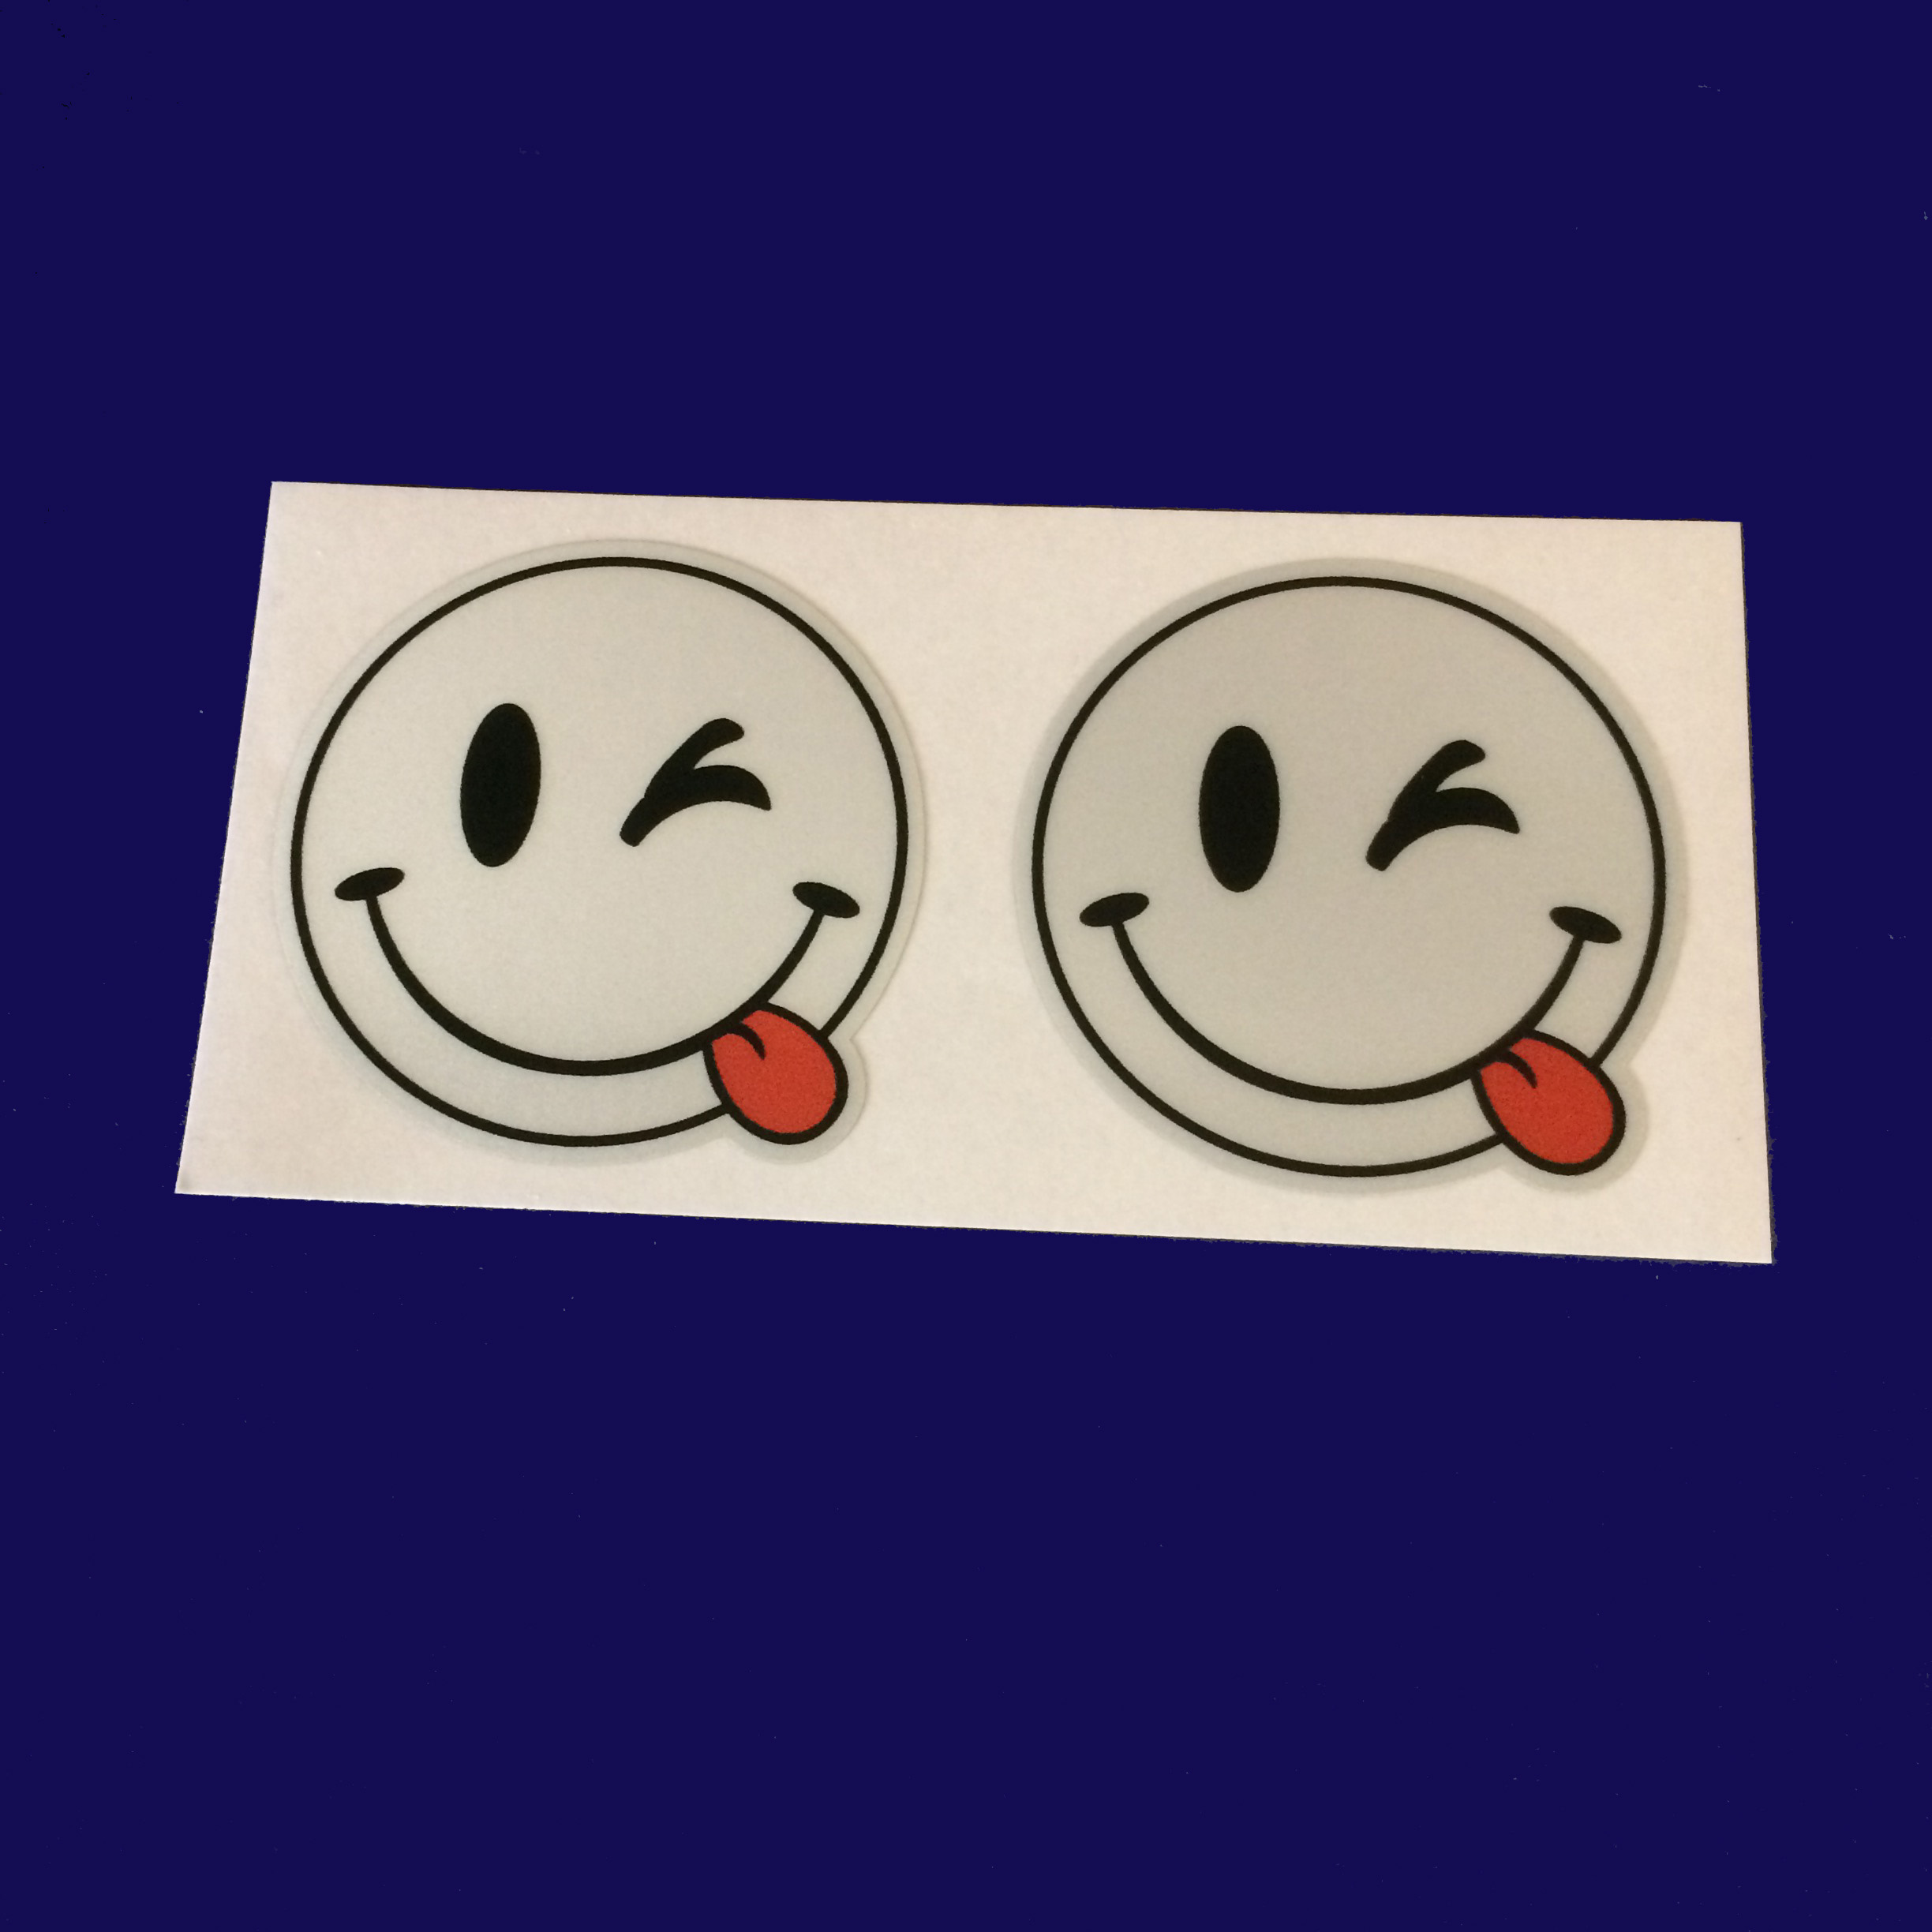 REFLECTIVE CHEEKY SMILEY EMOJI STICKERS. A smiling face winking an eye and sticking out a red tongue.